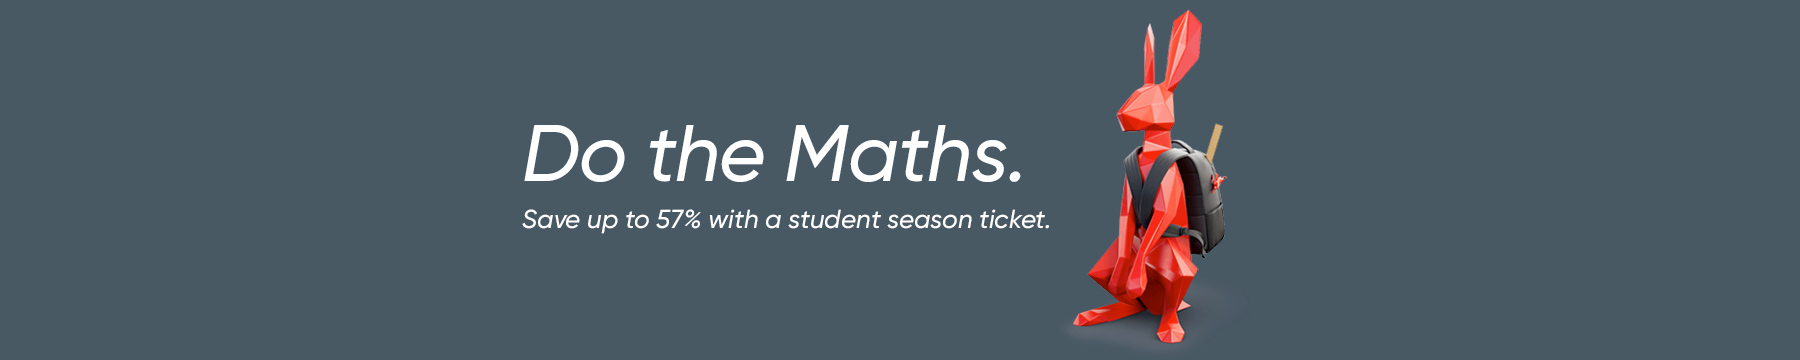 Do the maths. Save up to 57% with a student Season ticket.